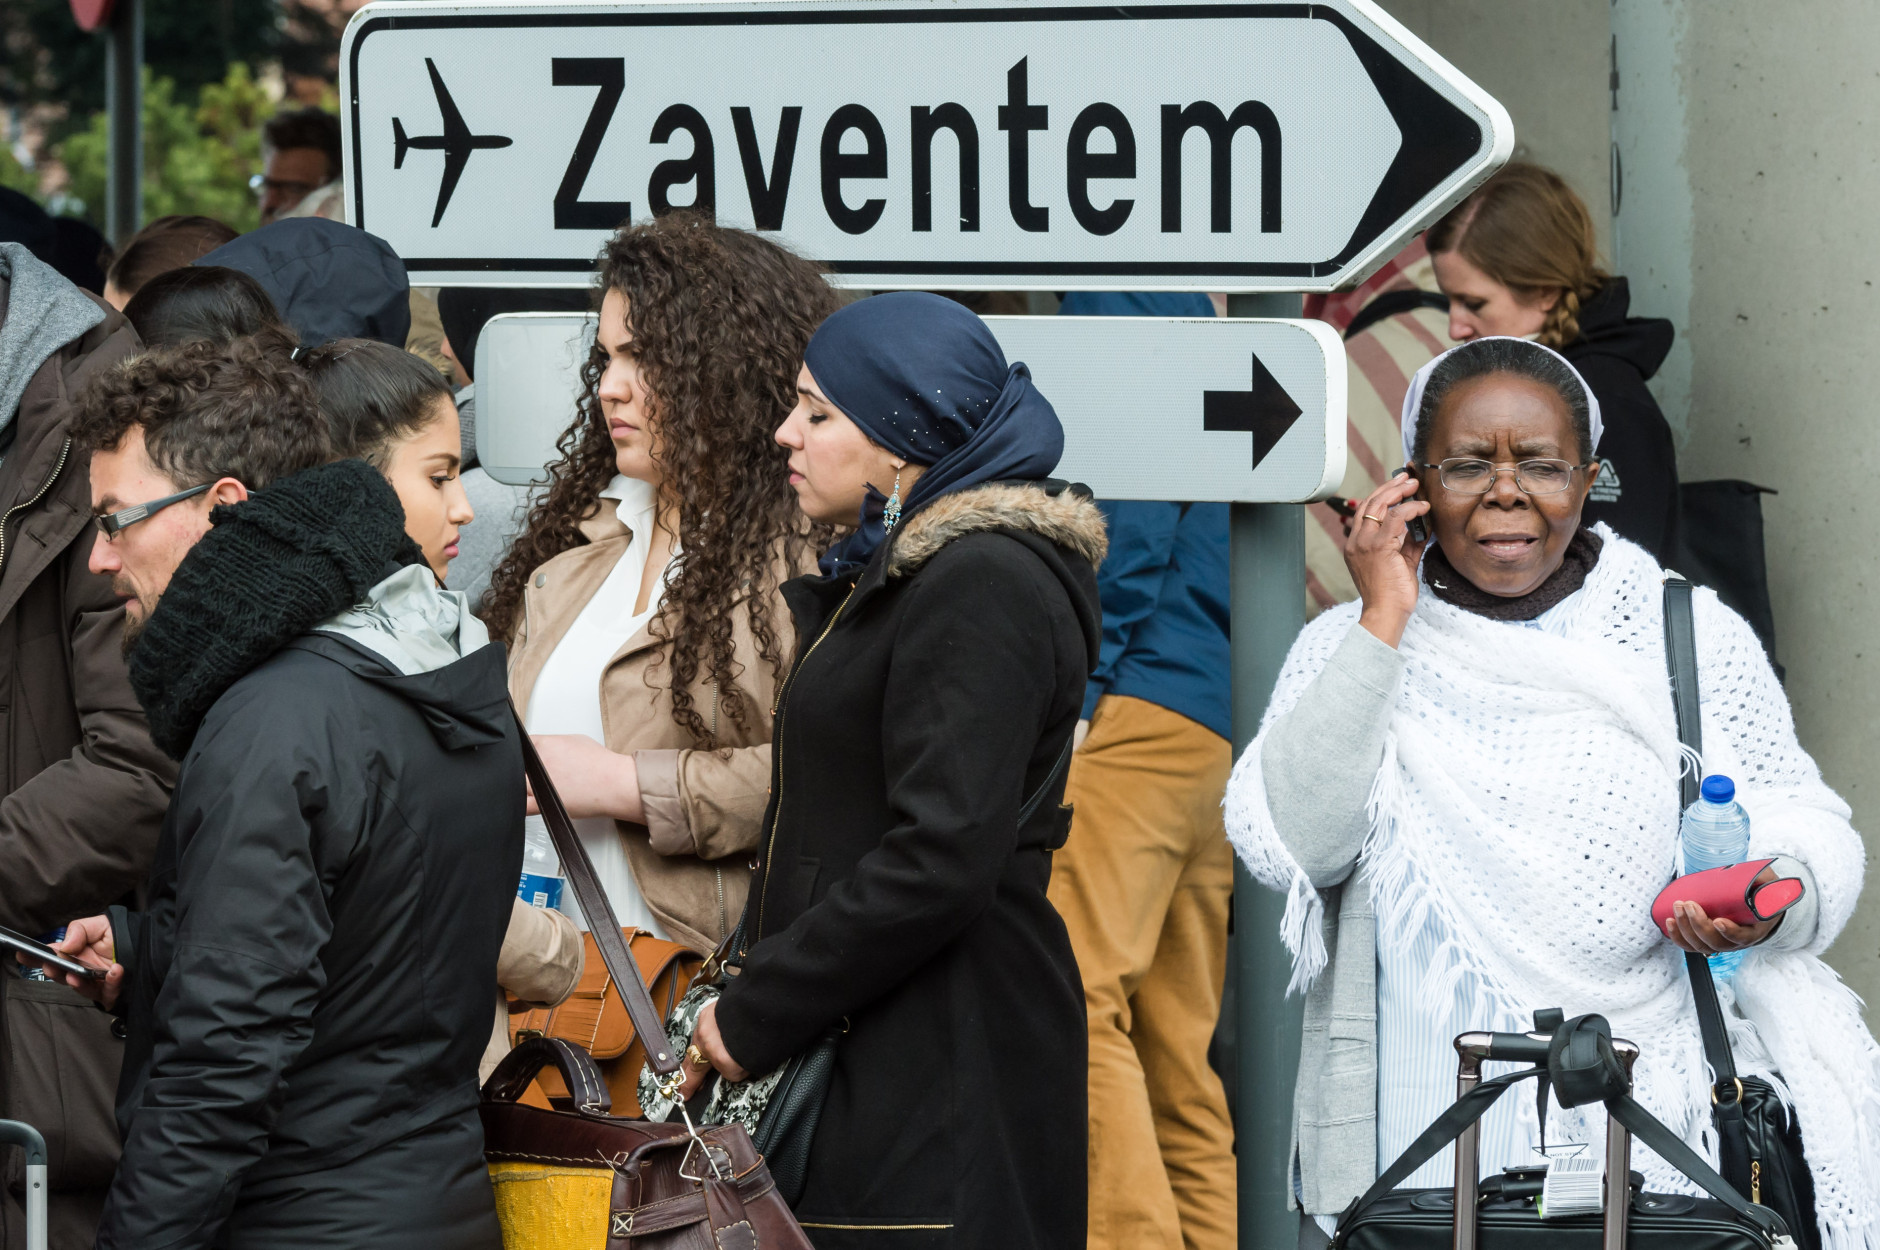 People stand near Brussels airport after being evacuated following  explosions that rocked the facility in Brussels, Belgium, Tuesday March 22, 2016. Authorities locked down the Belgian capital on Tuesday after explosions rocked the Brussels airport and subway system, killing  a number of people and injuring many more. Belgium raised its terror alert to its highest level, diverting arriving planes and trains and ordering people to stay where they were. Airports across Europe tightened security. (AP Photo/Geert Vanden Wijngaert)